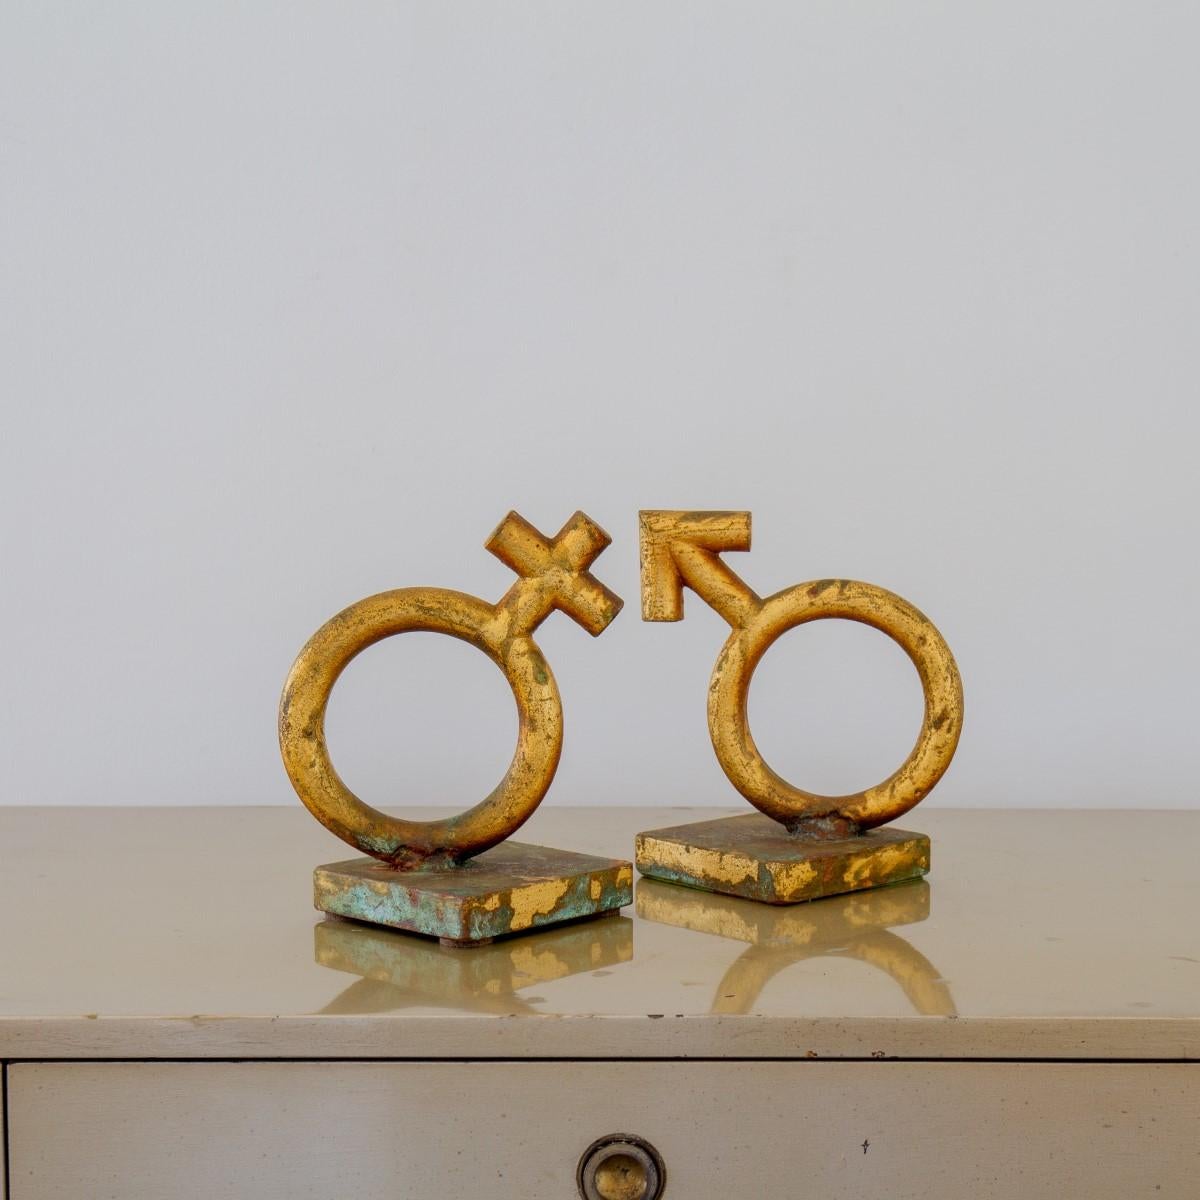 A pair of very tarnished gold leaf cast metal bookends depicting the Mars and Venus gender symbols by Curtis Jere signed and dated 1969.

Curtis Jeré is the collaboration of two metal sculptors Jerry Fels and Curtis Freiler who founded the company